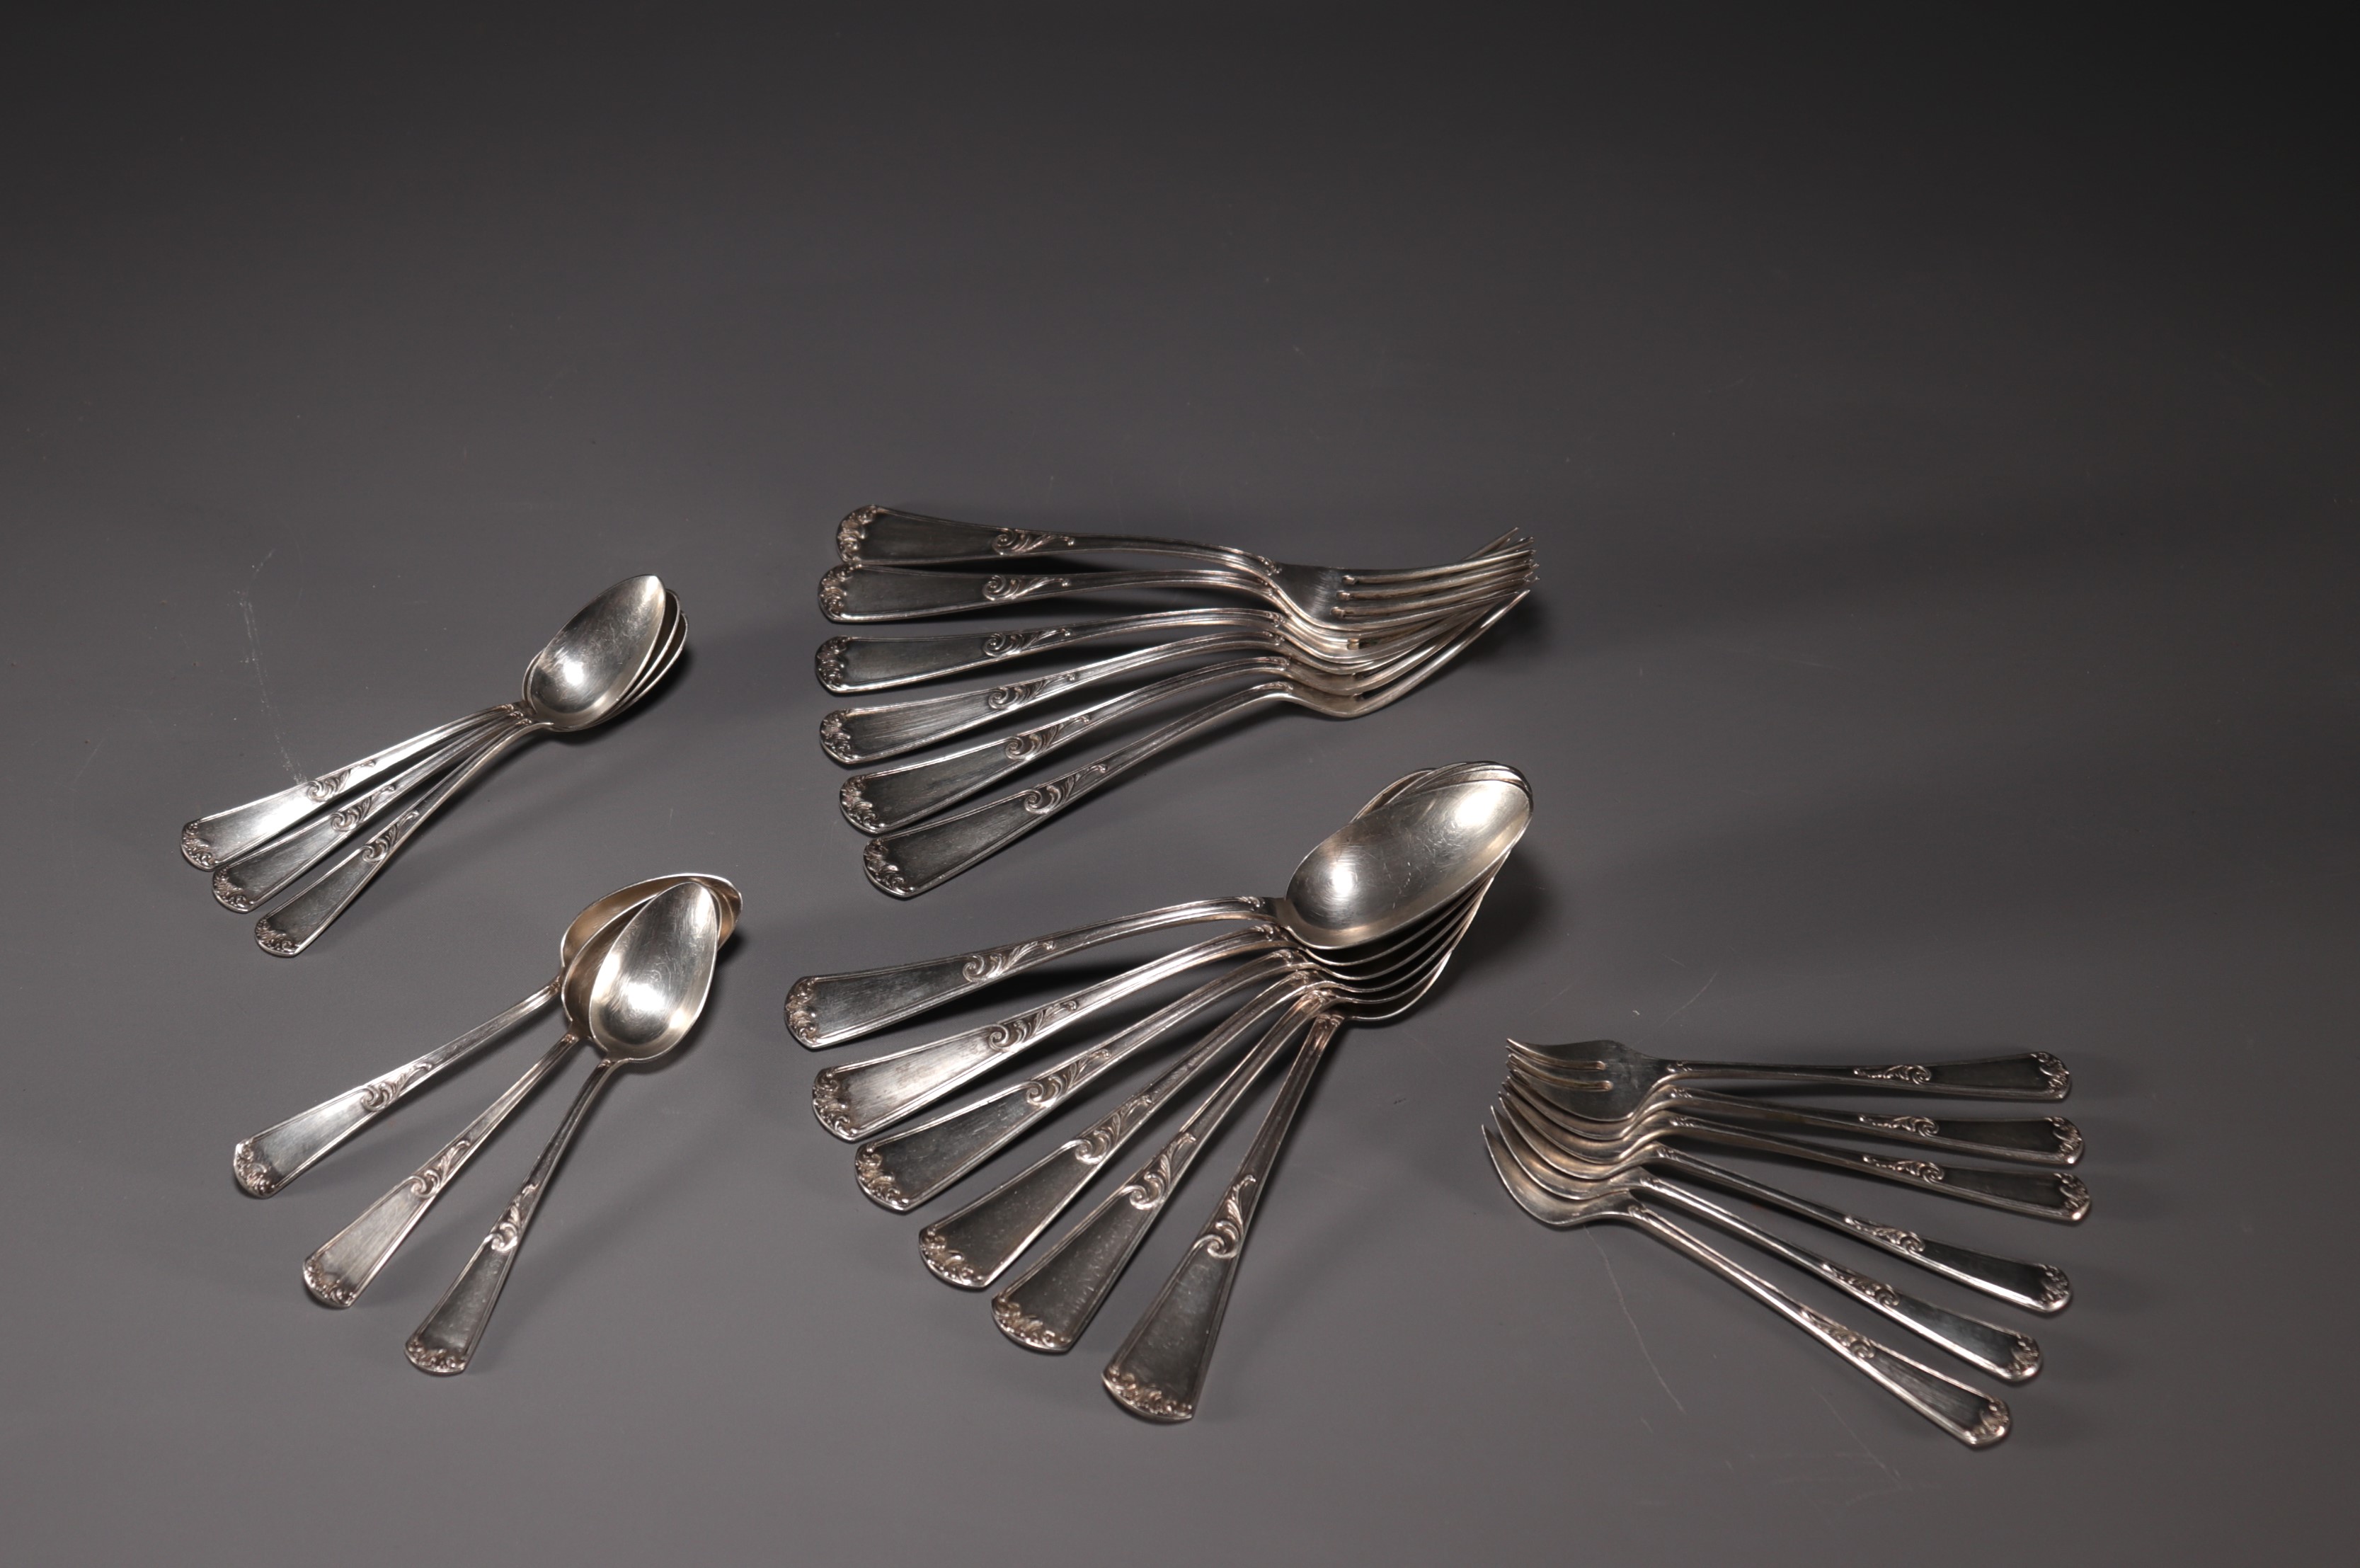 Set of 24 pieces of solid silver flatware, hallmarked V.R.